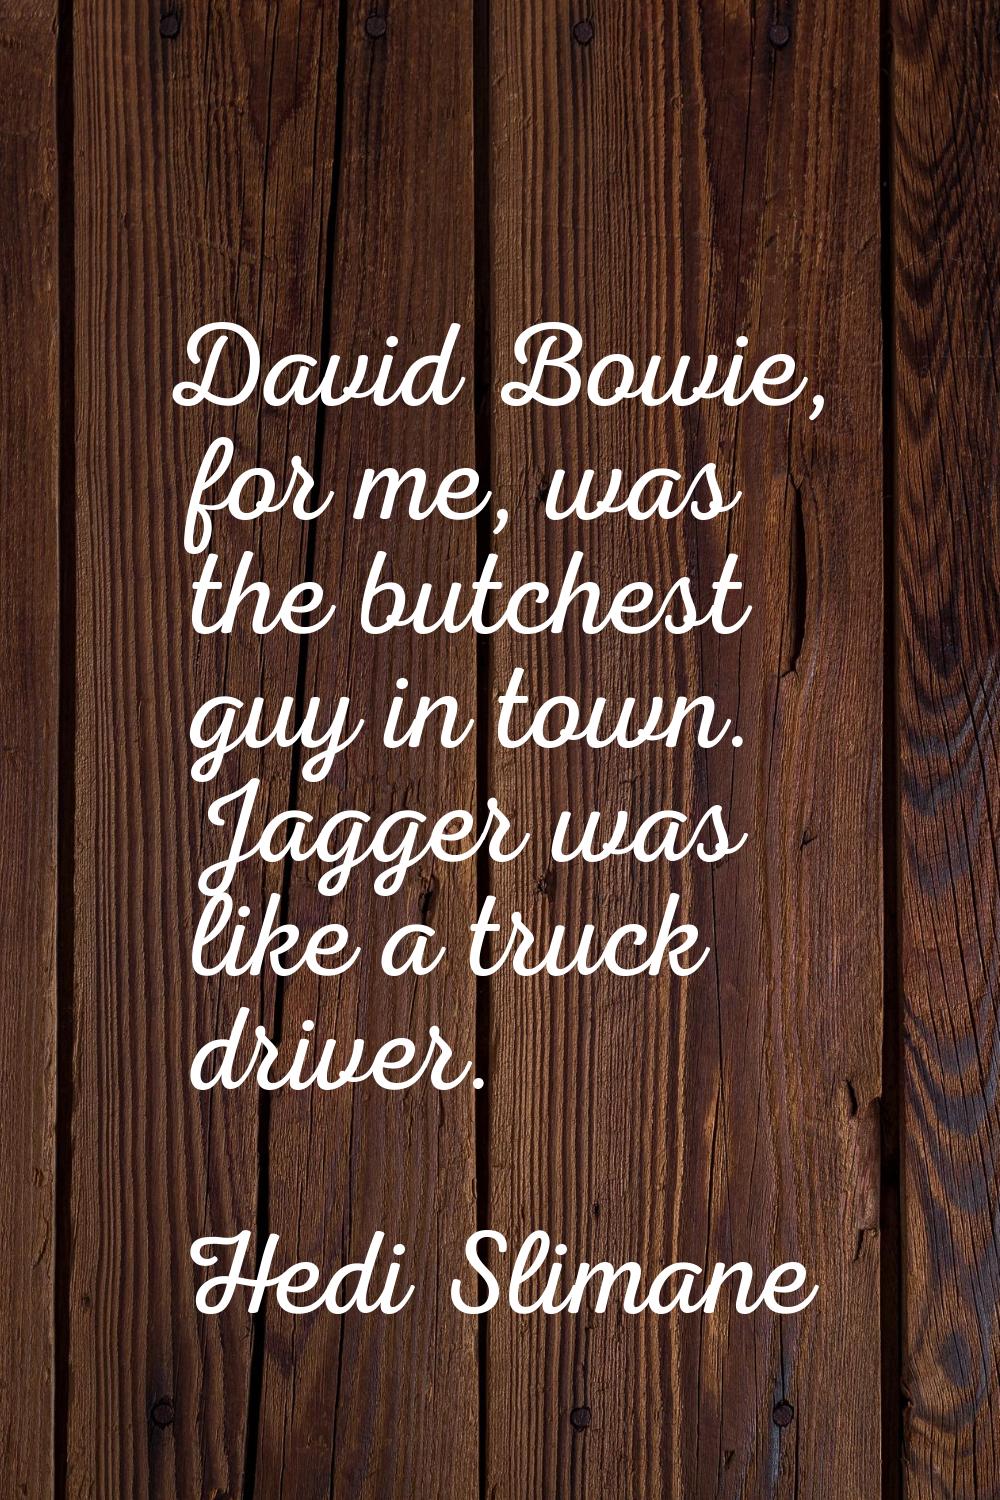 David Bowie, for me, was the butchest guy in town. Jagger was like a truck driver.